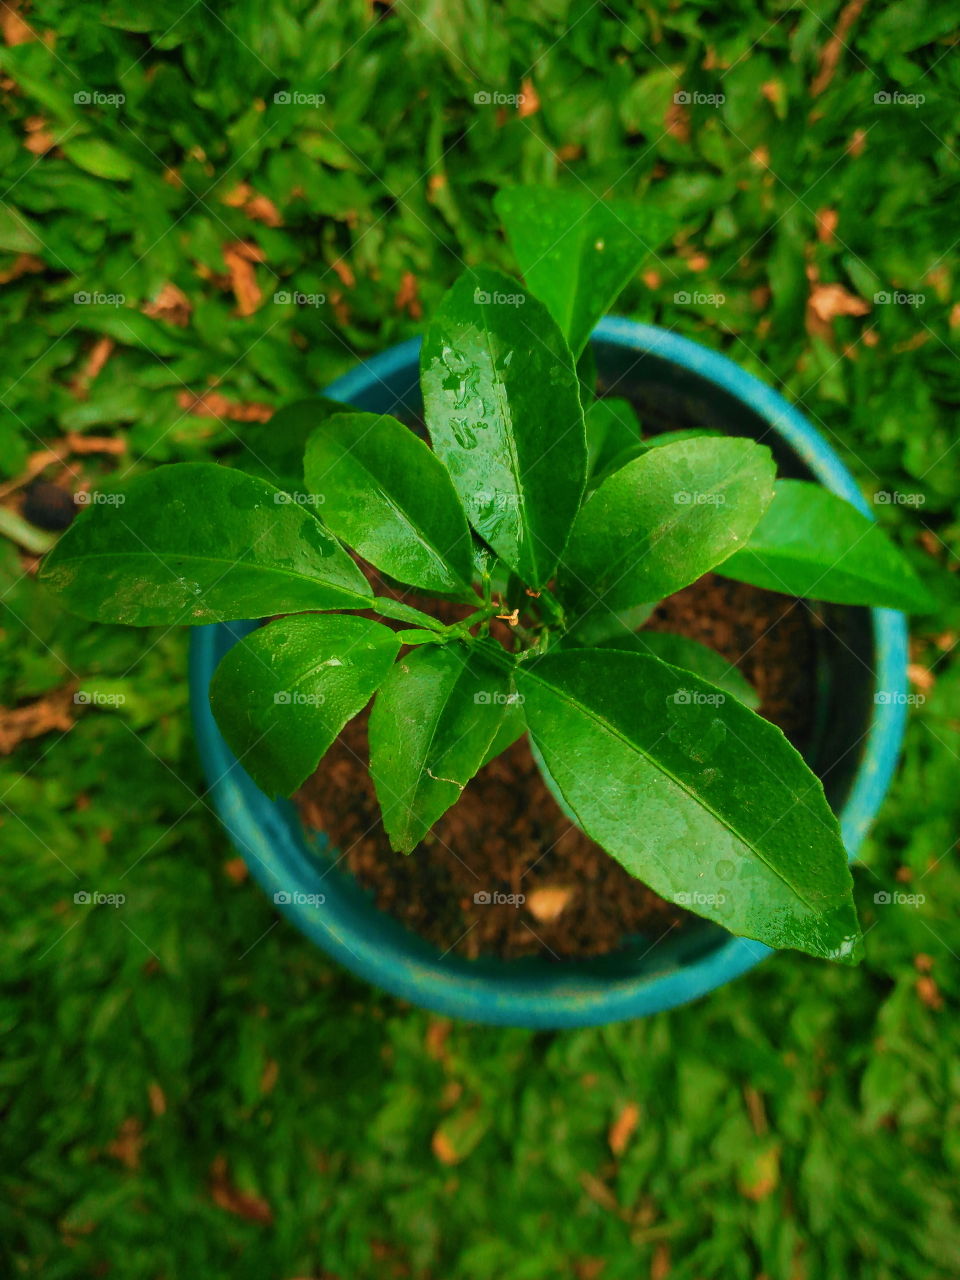 Young oranges in pots